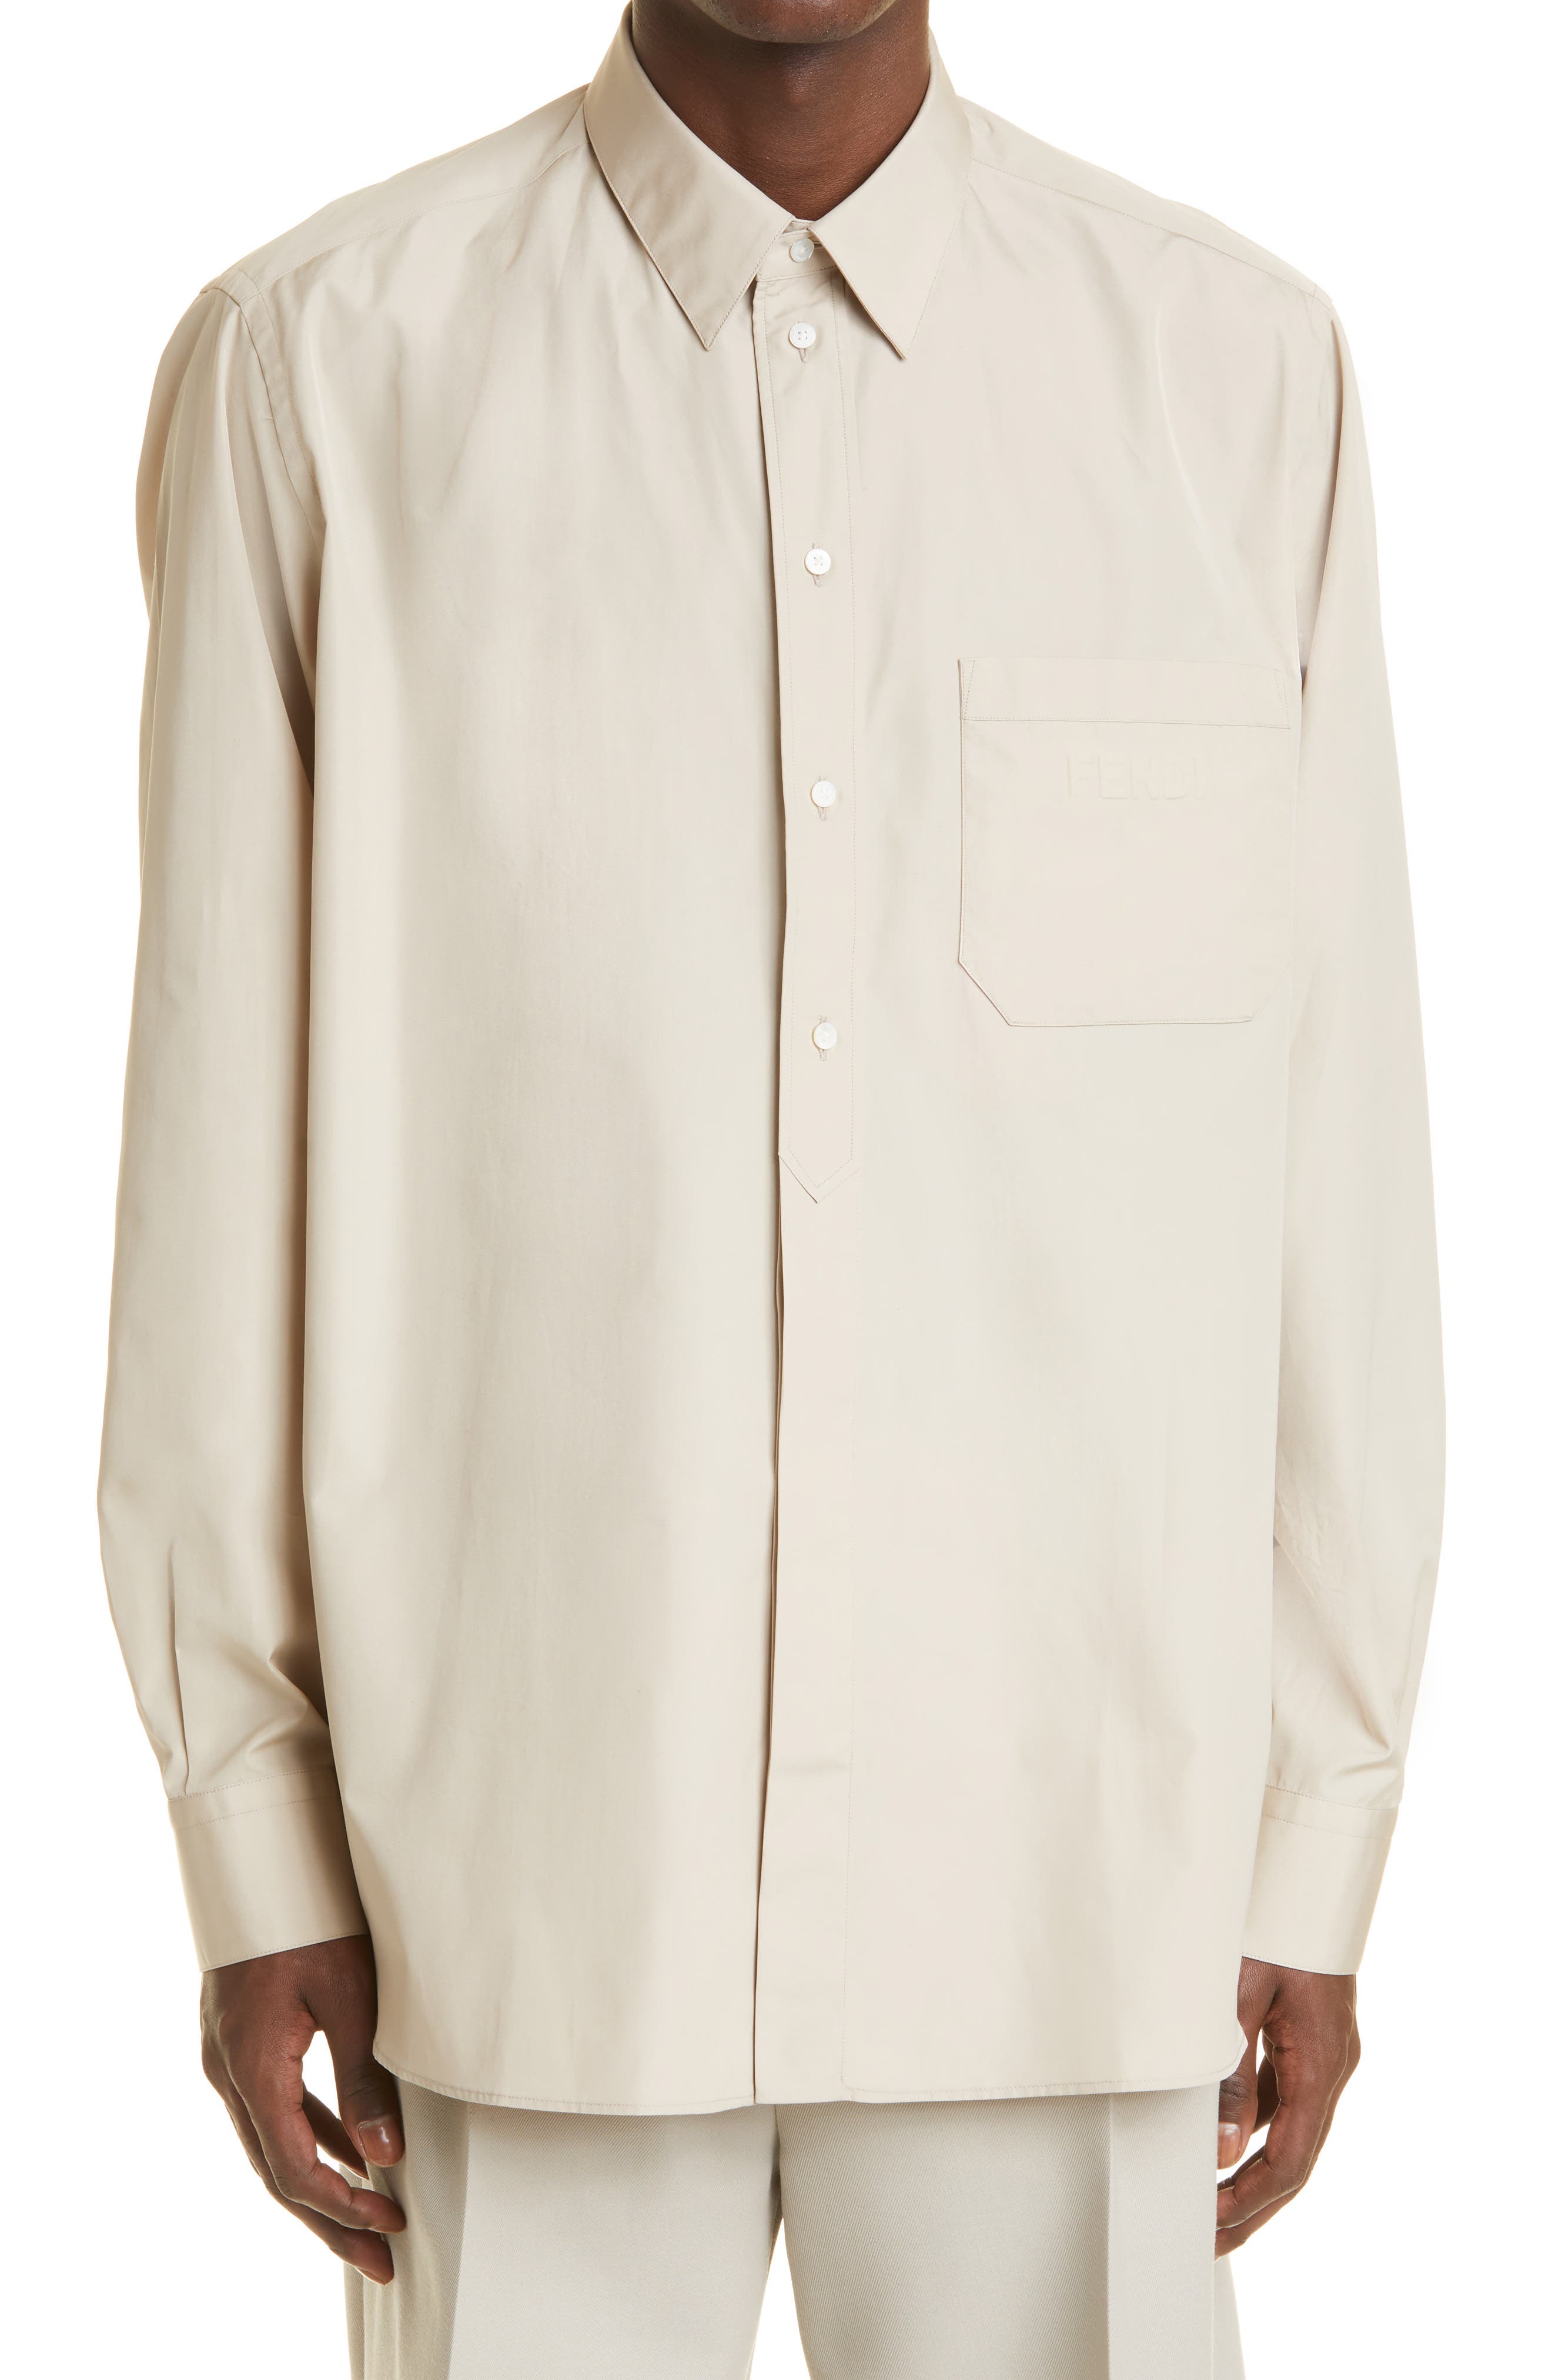 Fendi Long Sleeve Button-Up Shirt in Light Grey at Nordstrom, Size 41 Eu